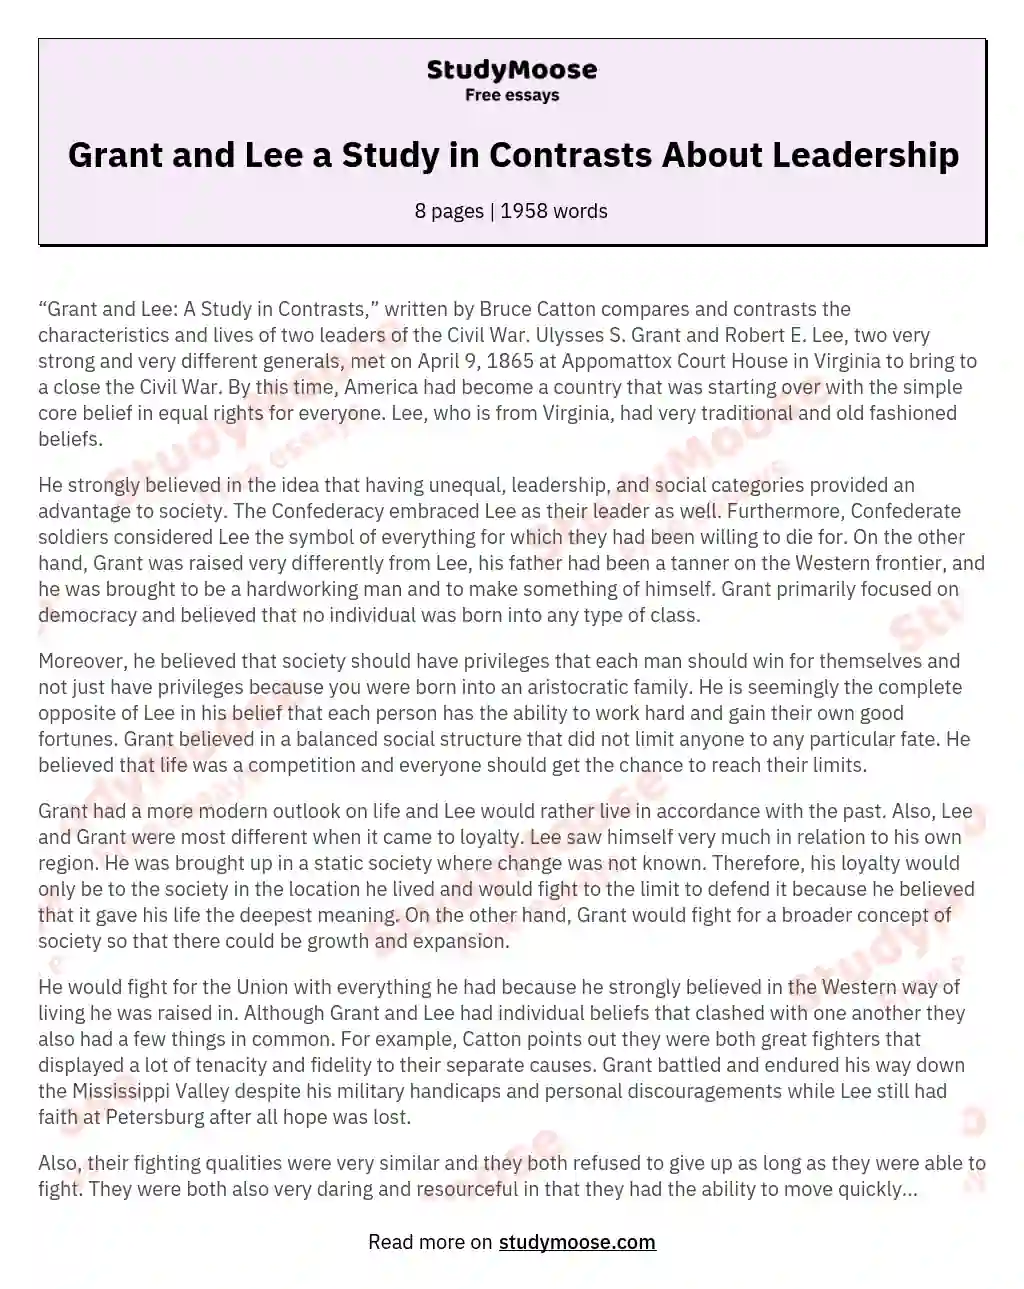 Grant and Lee a Study in Contrasts About Leadership